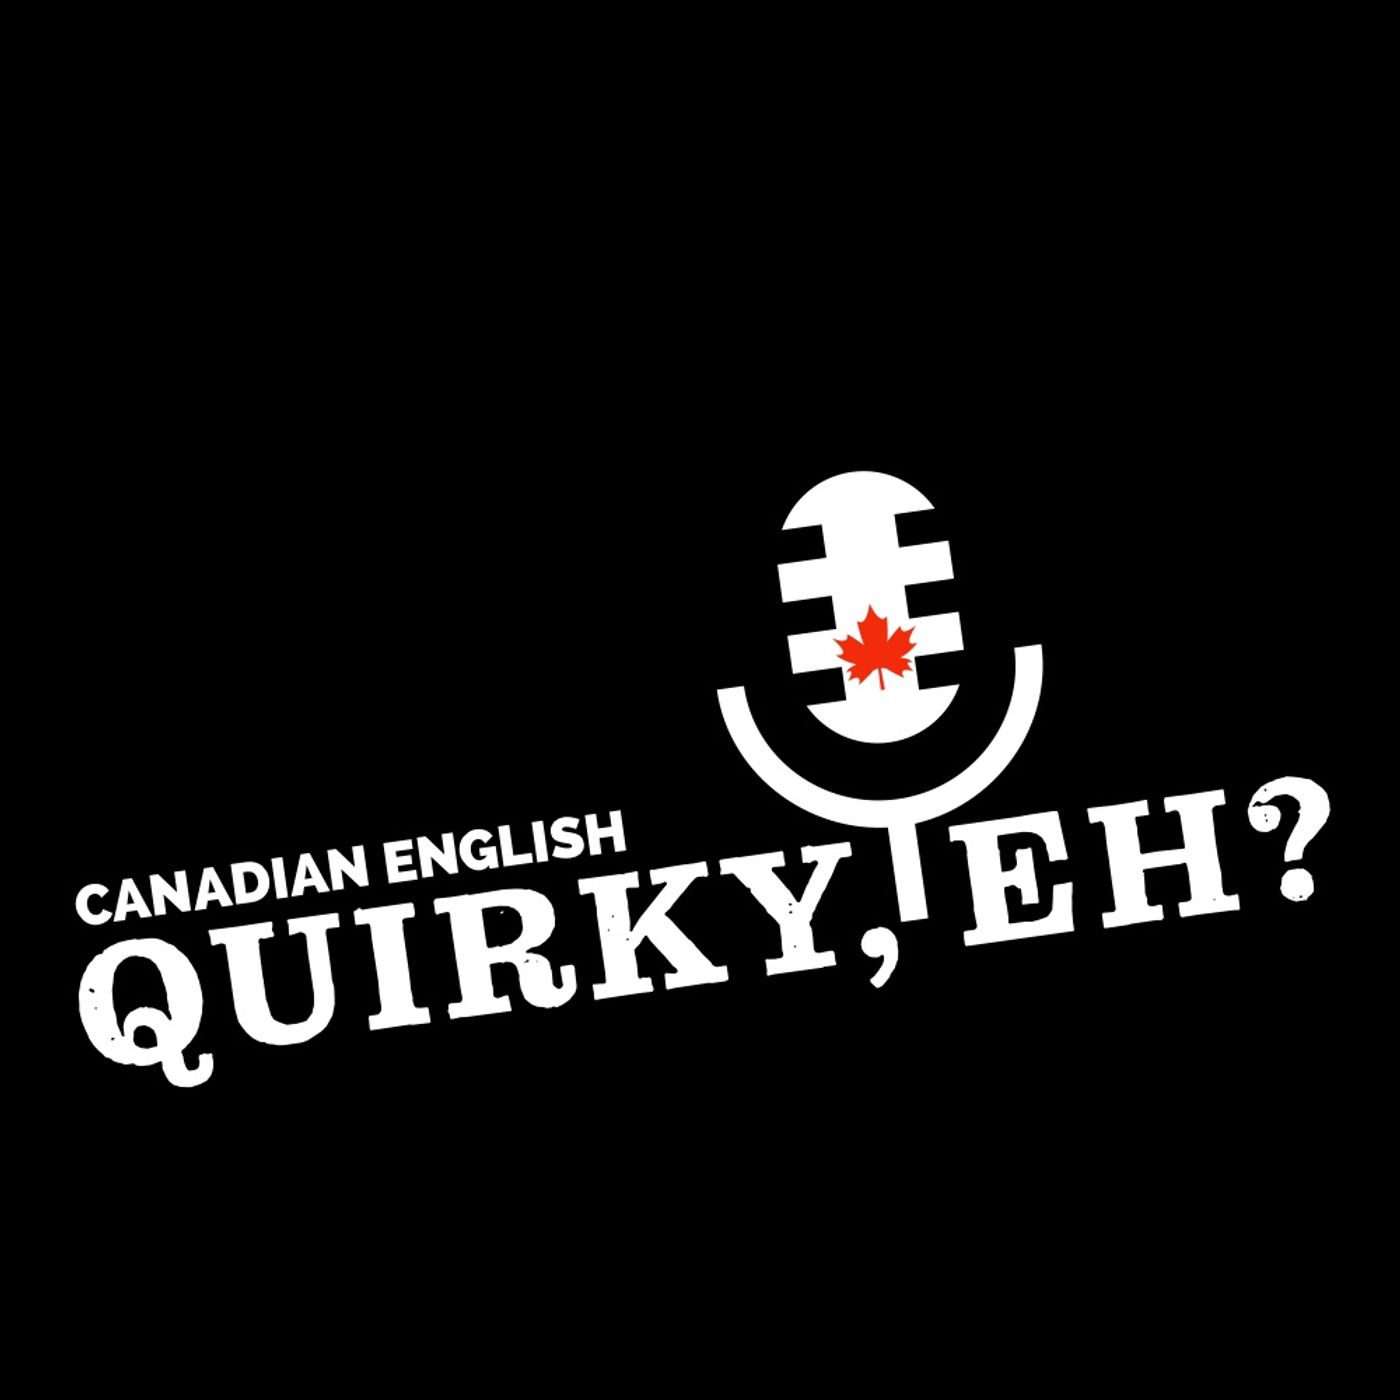 Overview - Get familiar with Canadian English